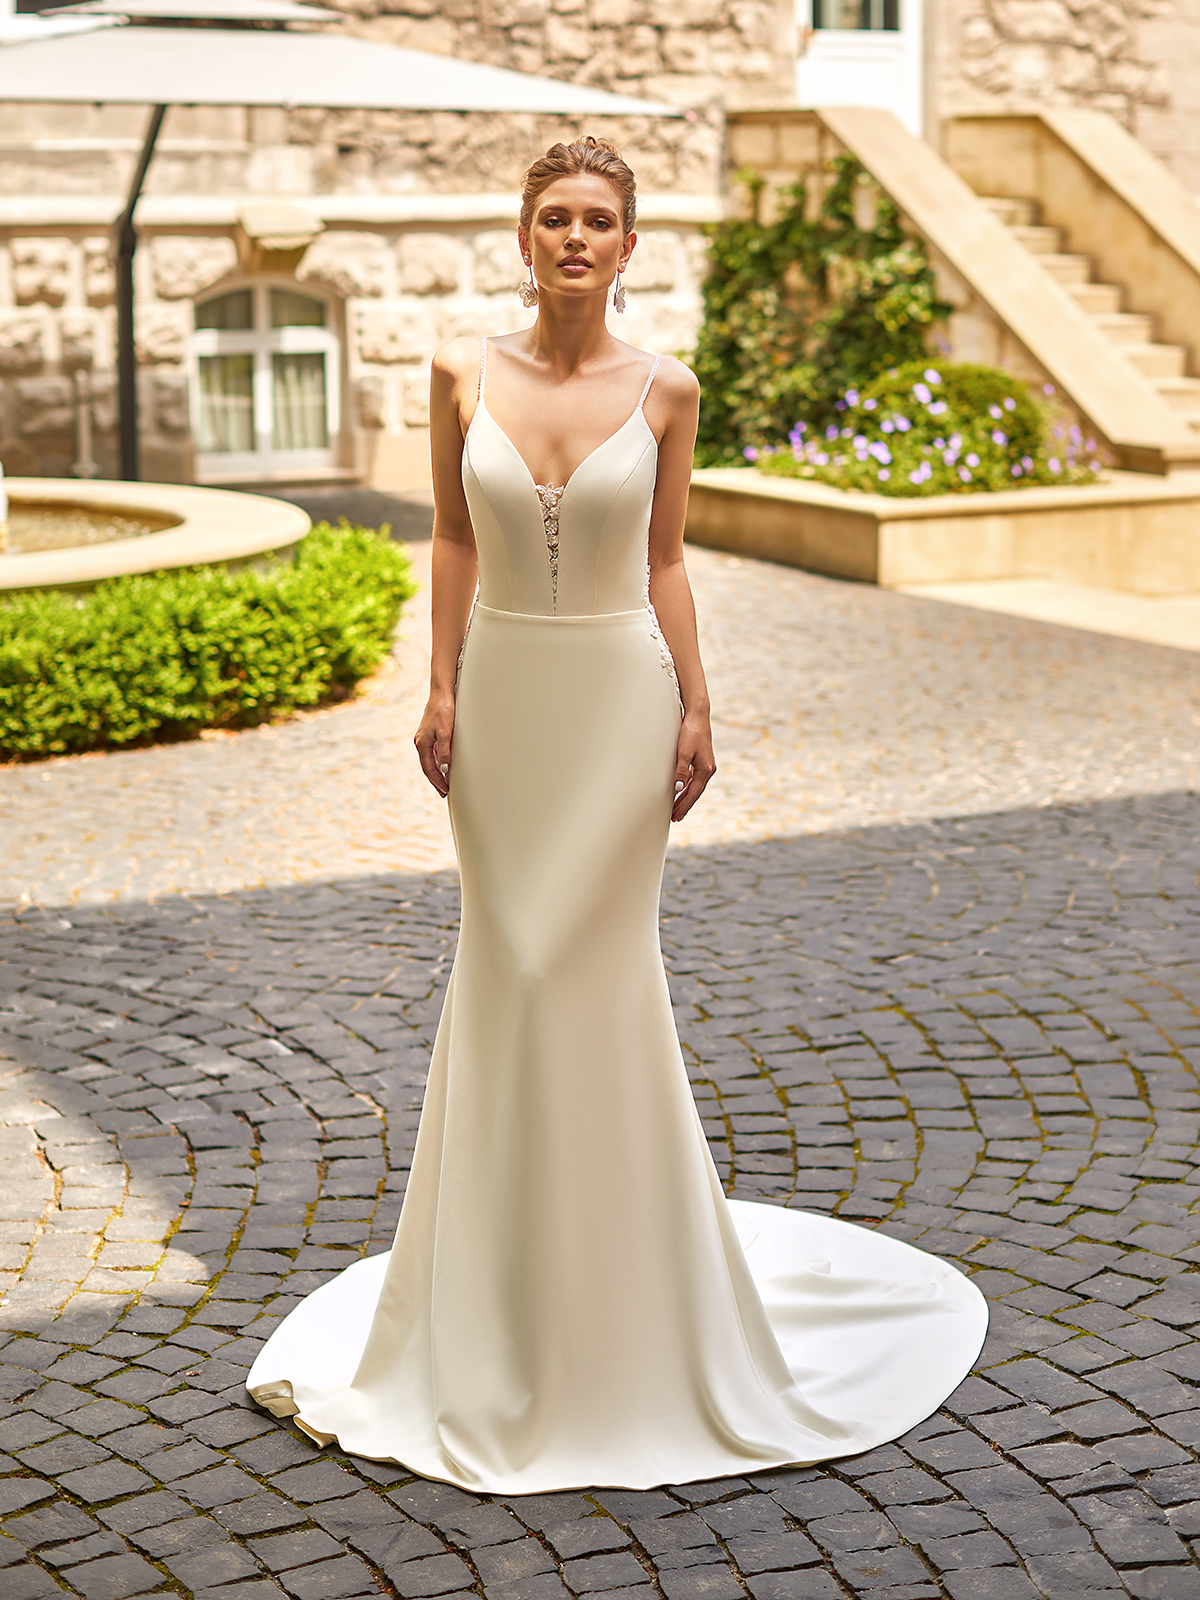 Bride standing in a courtyard wearing a crepe wedding dress with beaded spaghetti straps